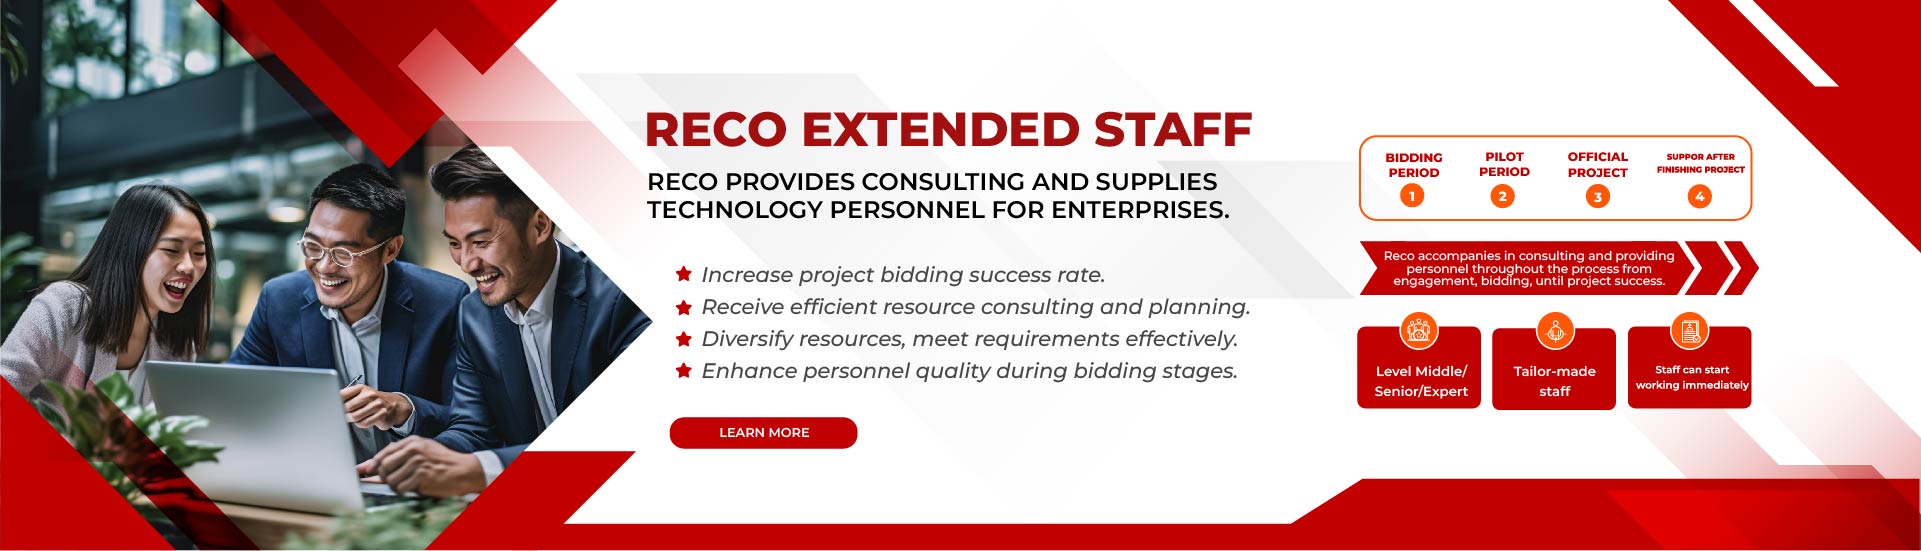 RECO EXTENDED STAFF